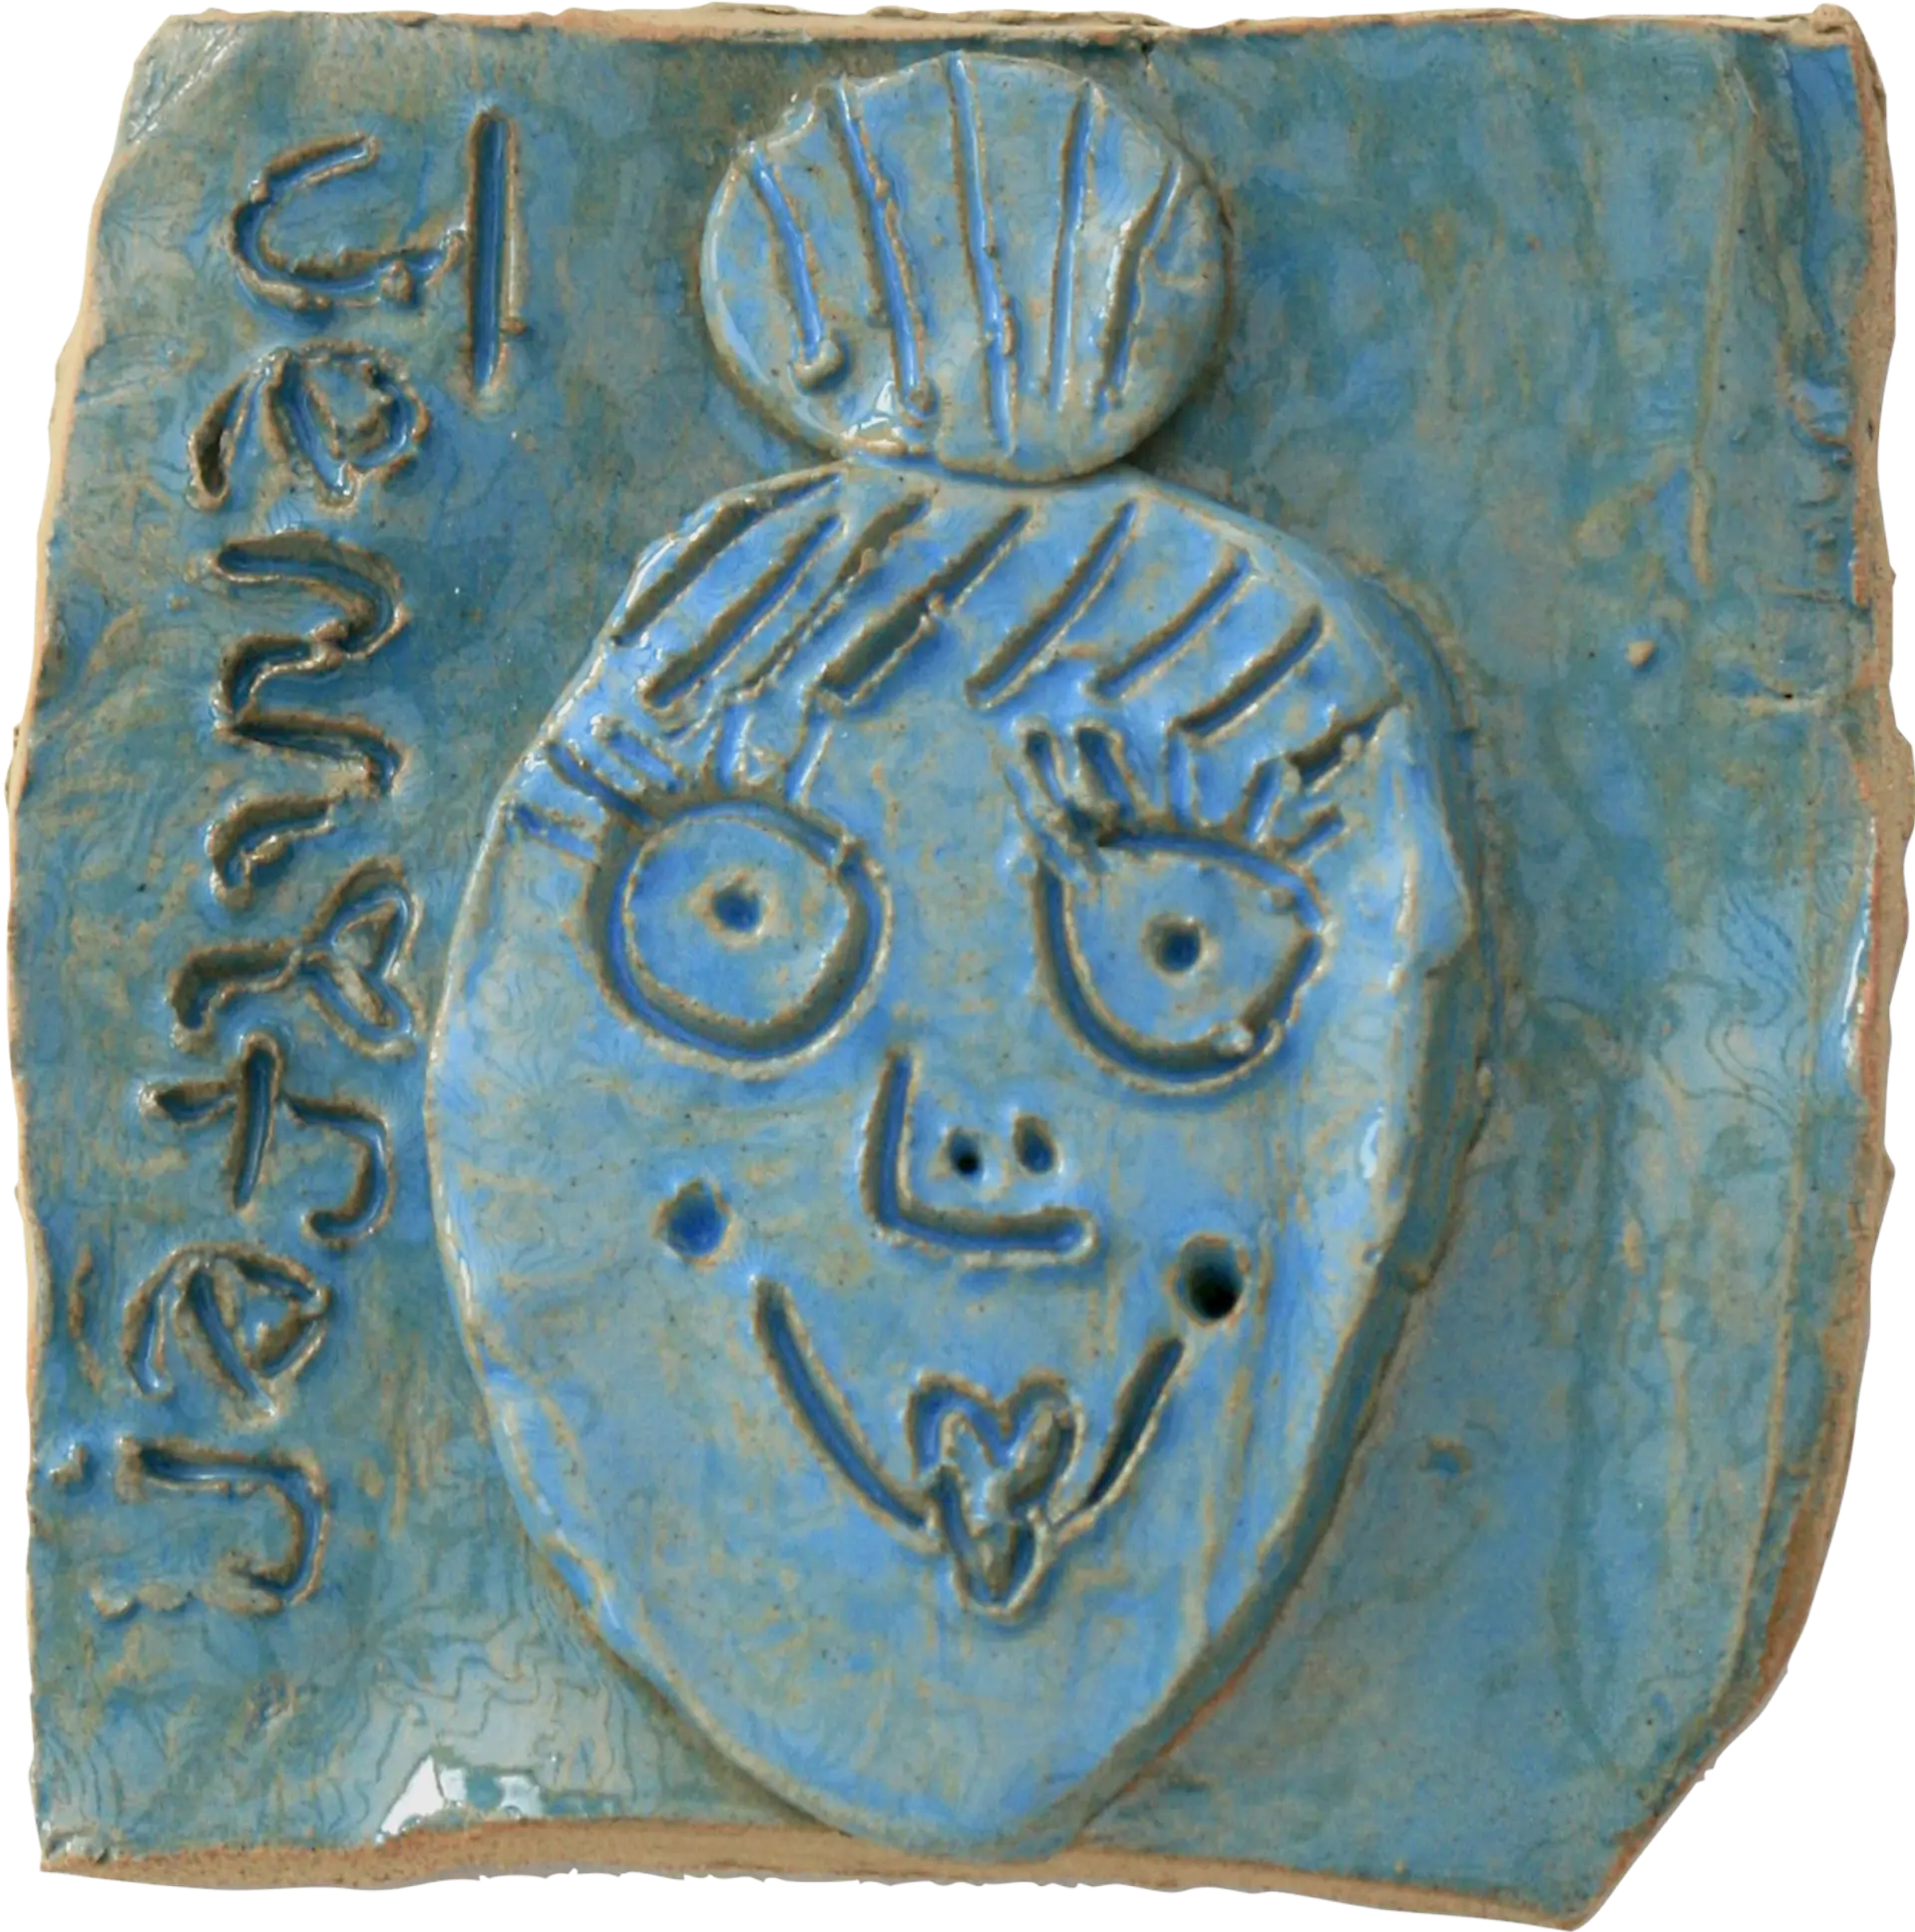 A blue glazed ceramic tile of Jessica’s sister Jennifer. She has her hair in a bun on top of her head, and is smiling. ‘Jennifer’ is written down the side of the tile, with a love heart instead of a dot on top of the letter i. 